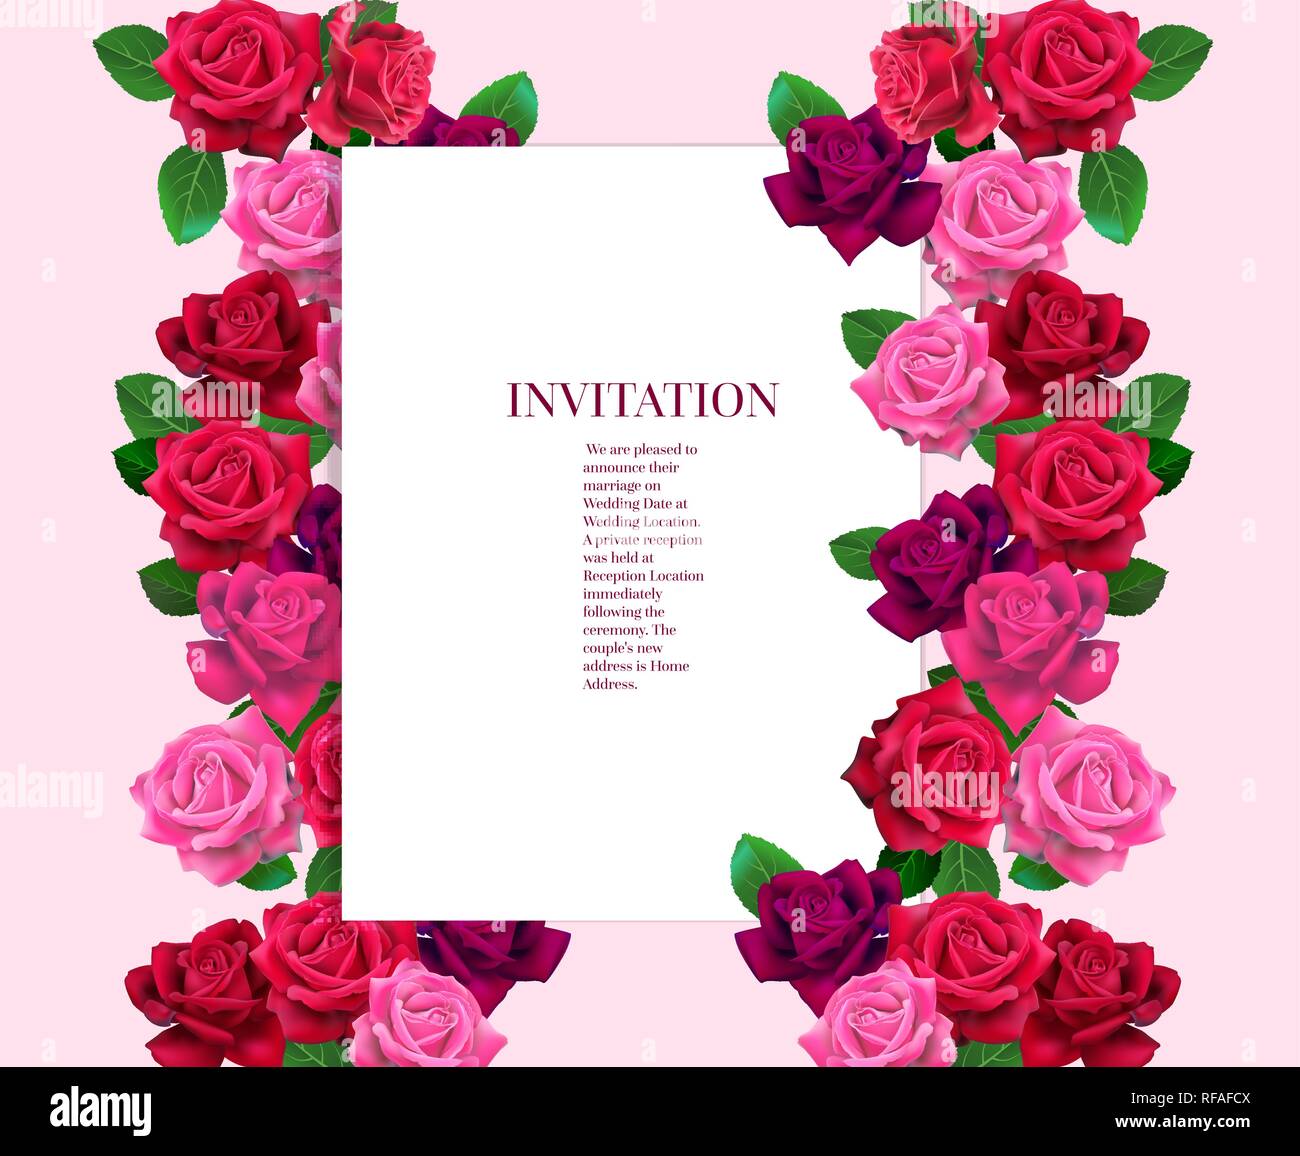 Roses beautiful flowers frame. Template for design holiday cards. Stock Vector